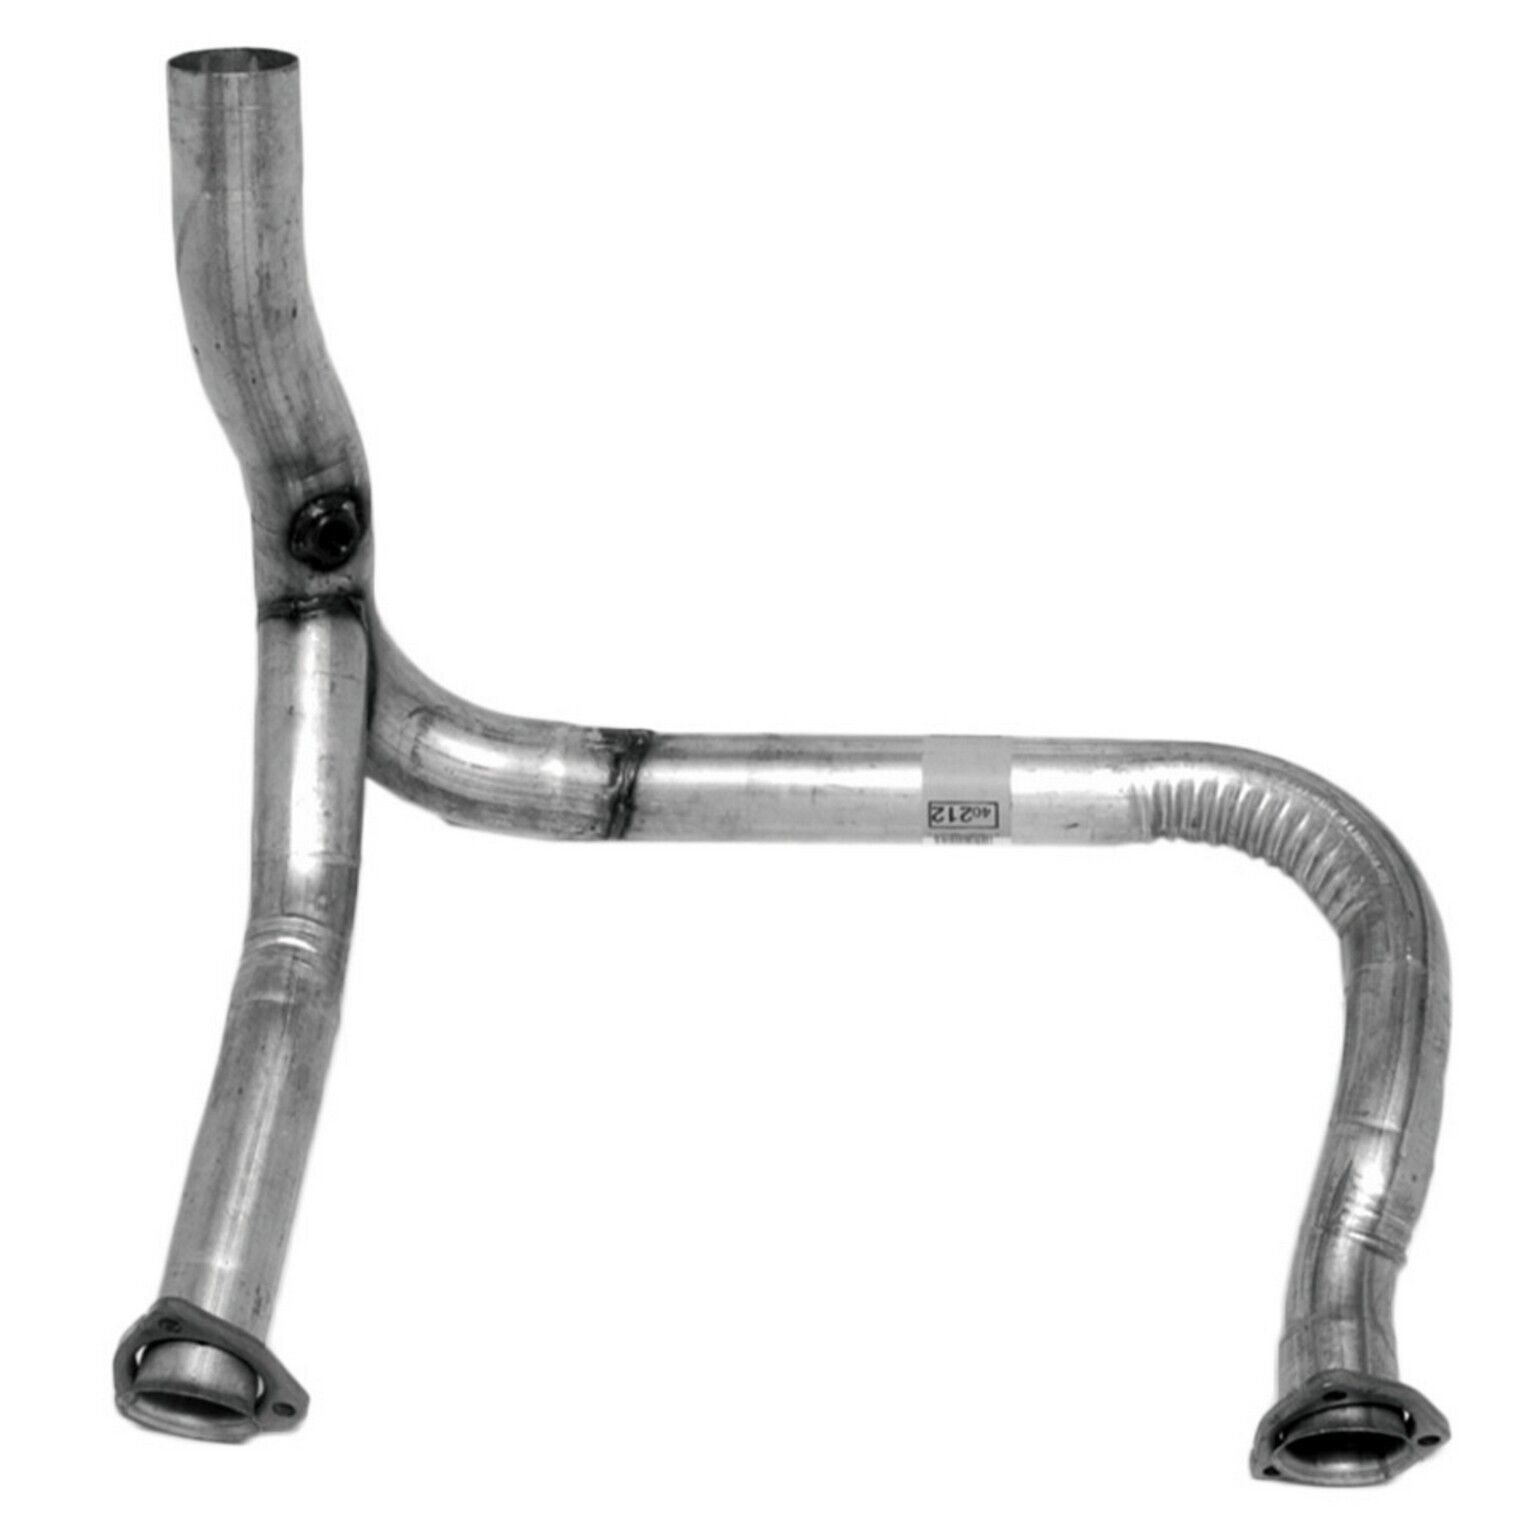 Walker Exhaust Y Pipe for S10, S10 Blazer, Jimmy, Sonoma, S15 Jimmy, S15 40212